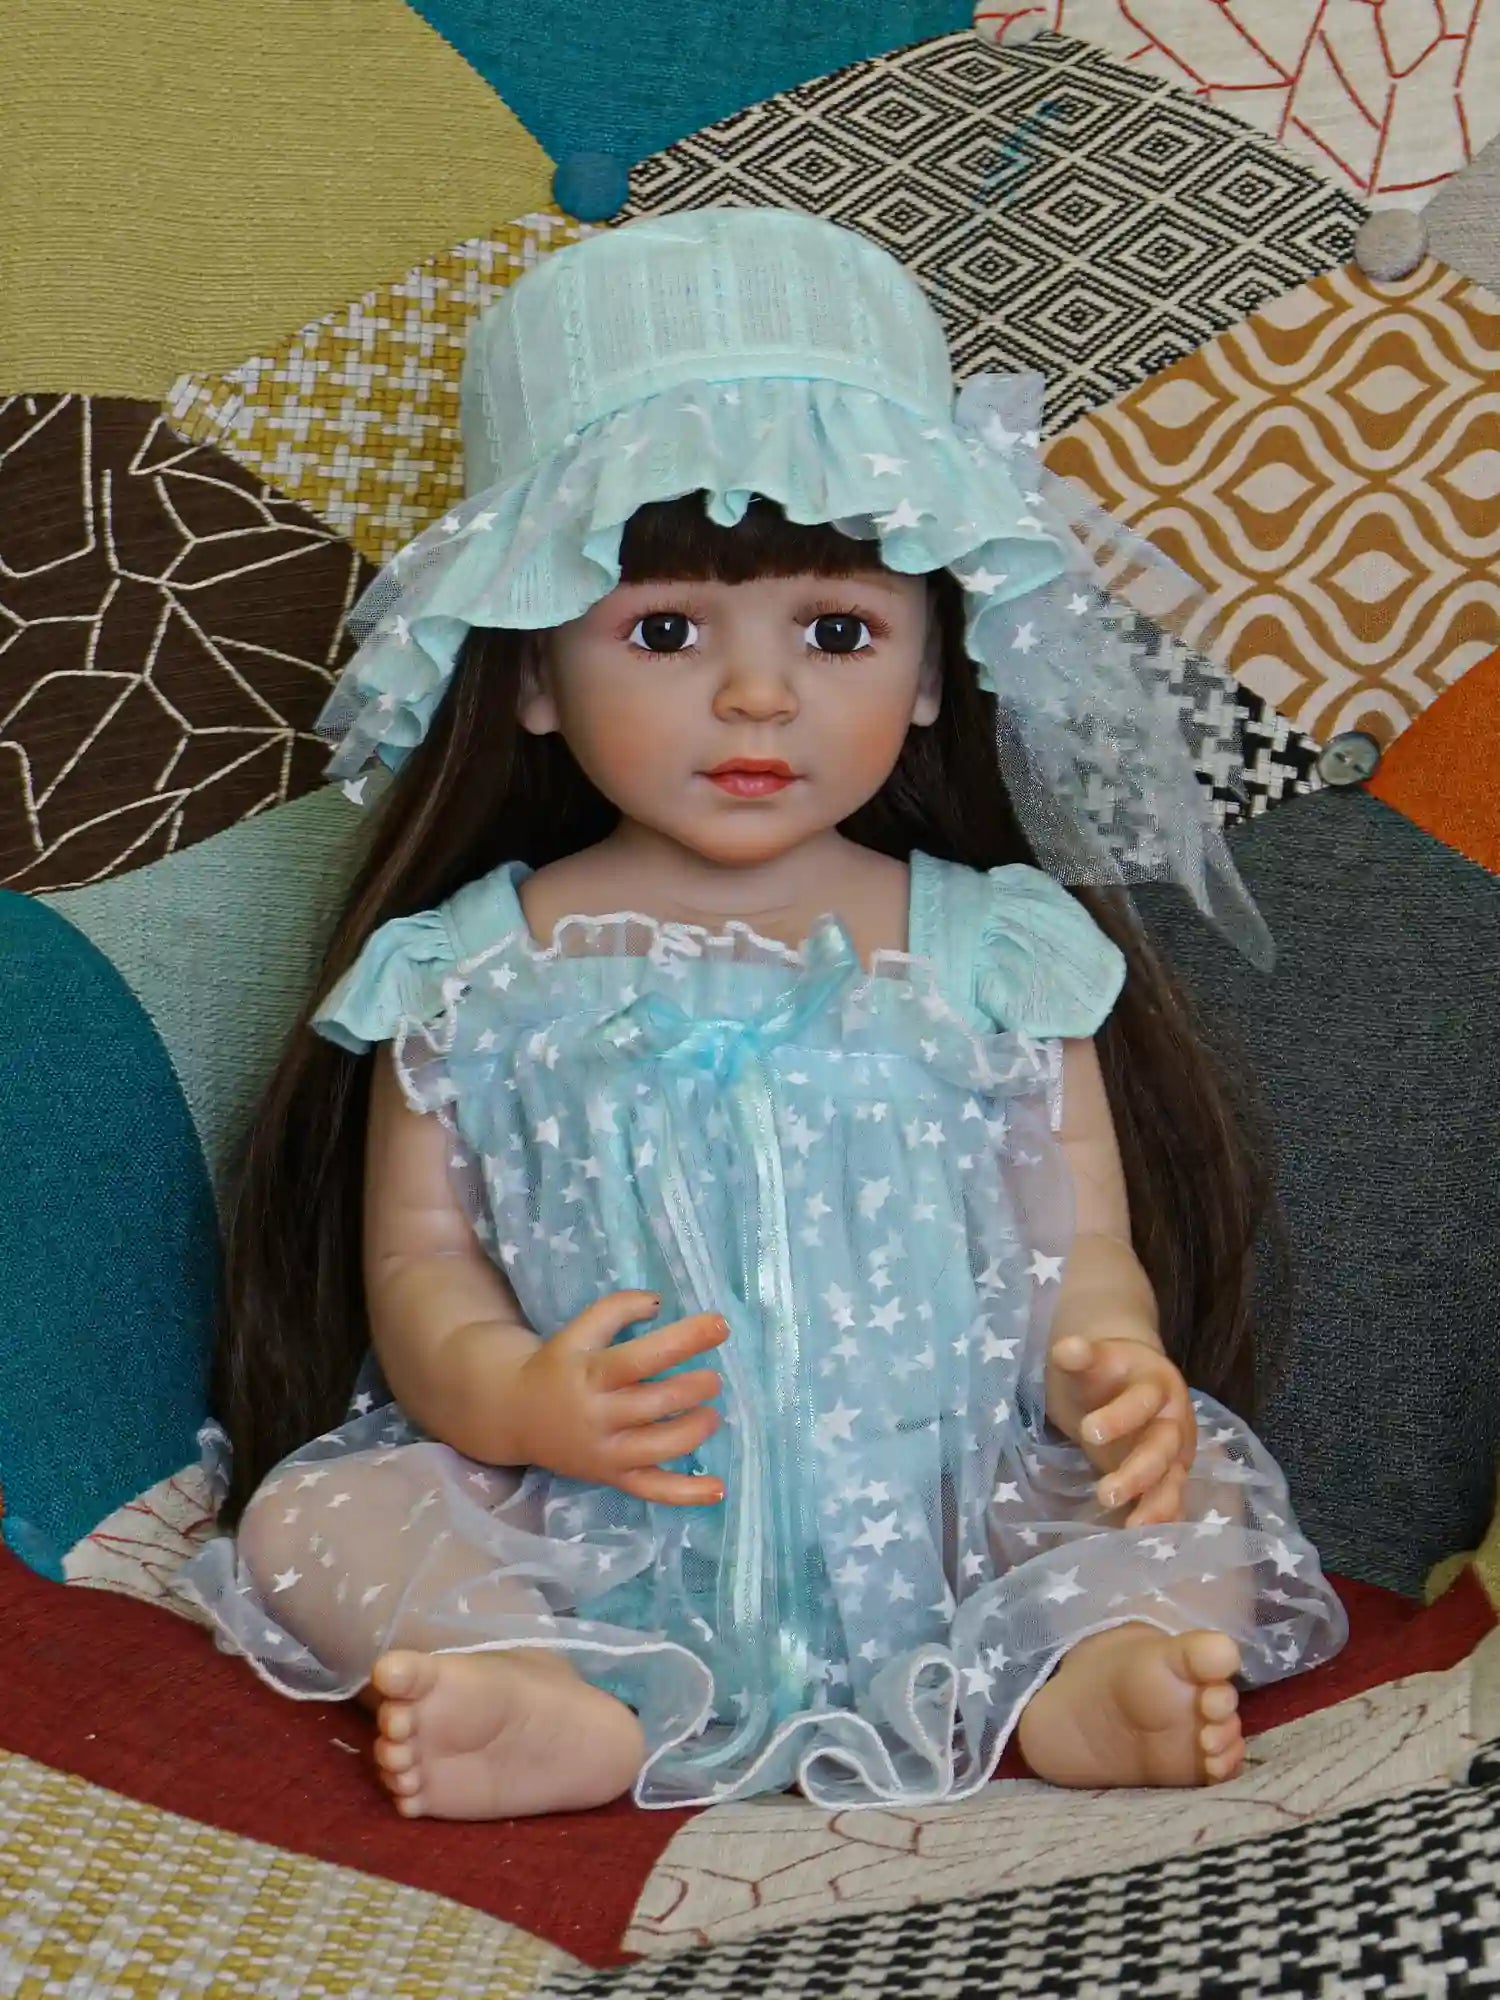 Collectible doll with star-print attire, giving off a dreamy, celestial vibe.